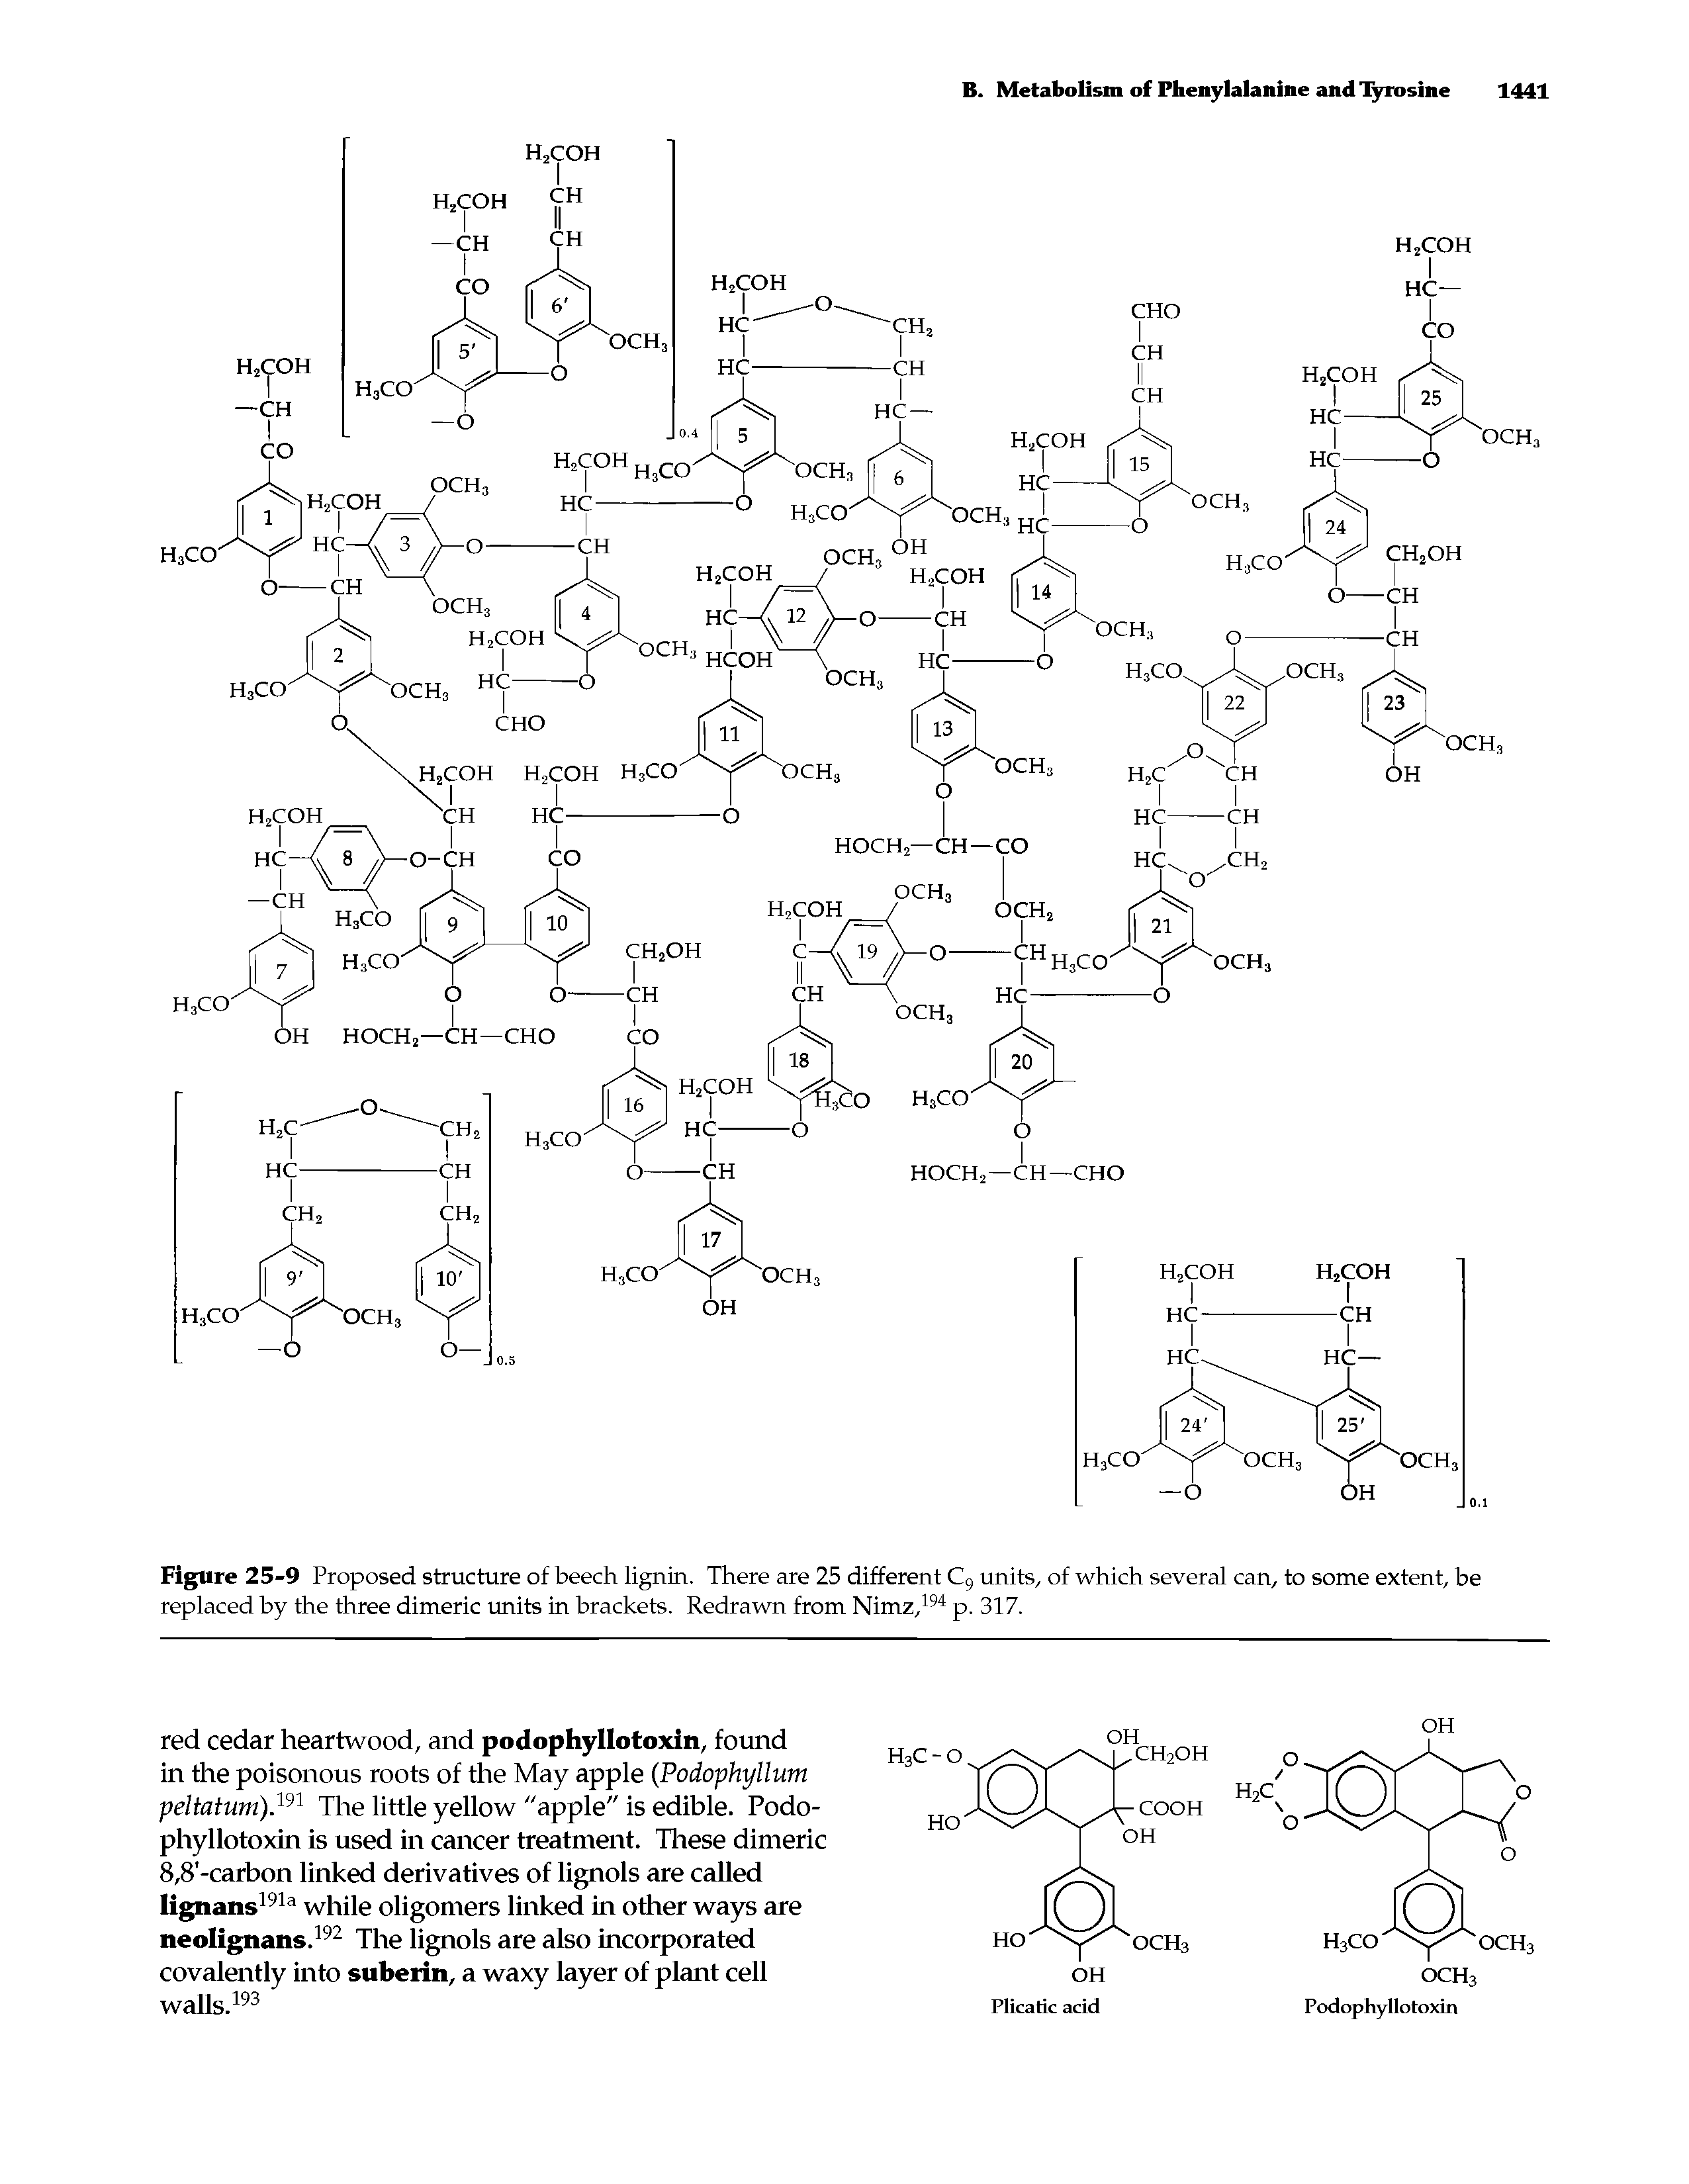 Figure 25-9 Proposed structure of beech lignin. There are 25 different C9 units, of which several can, to some extent, be replaced by the three dimeric units in brackets. Redrawn from Nimz,194 p. 317.